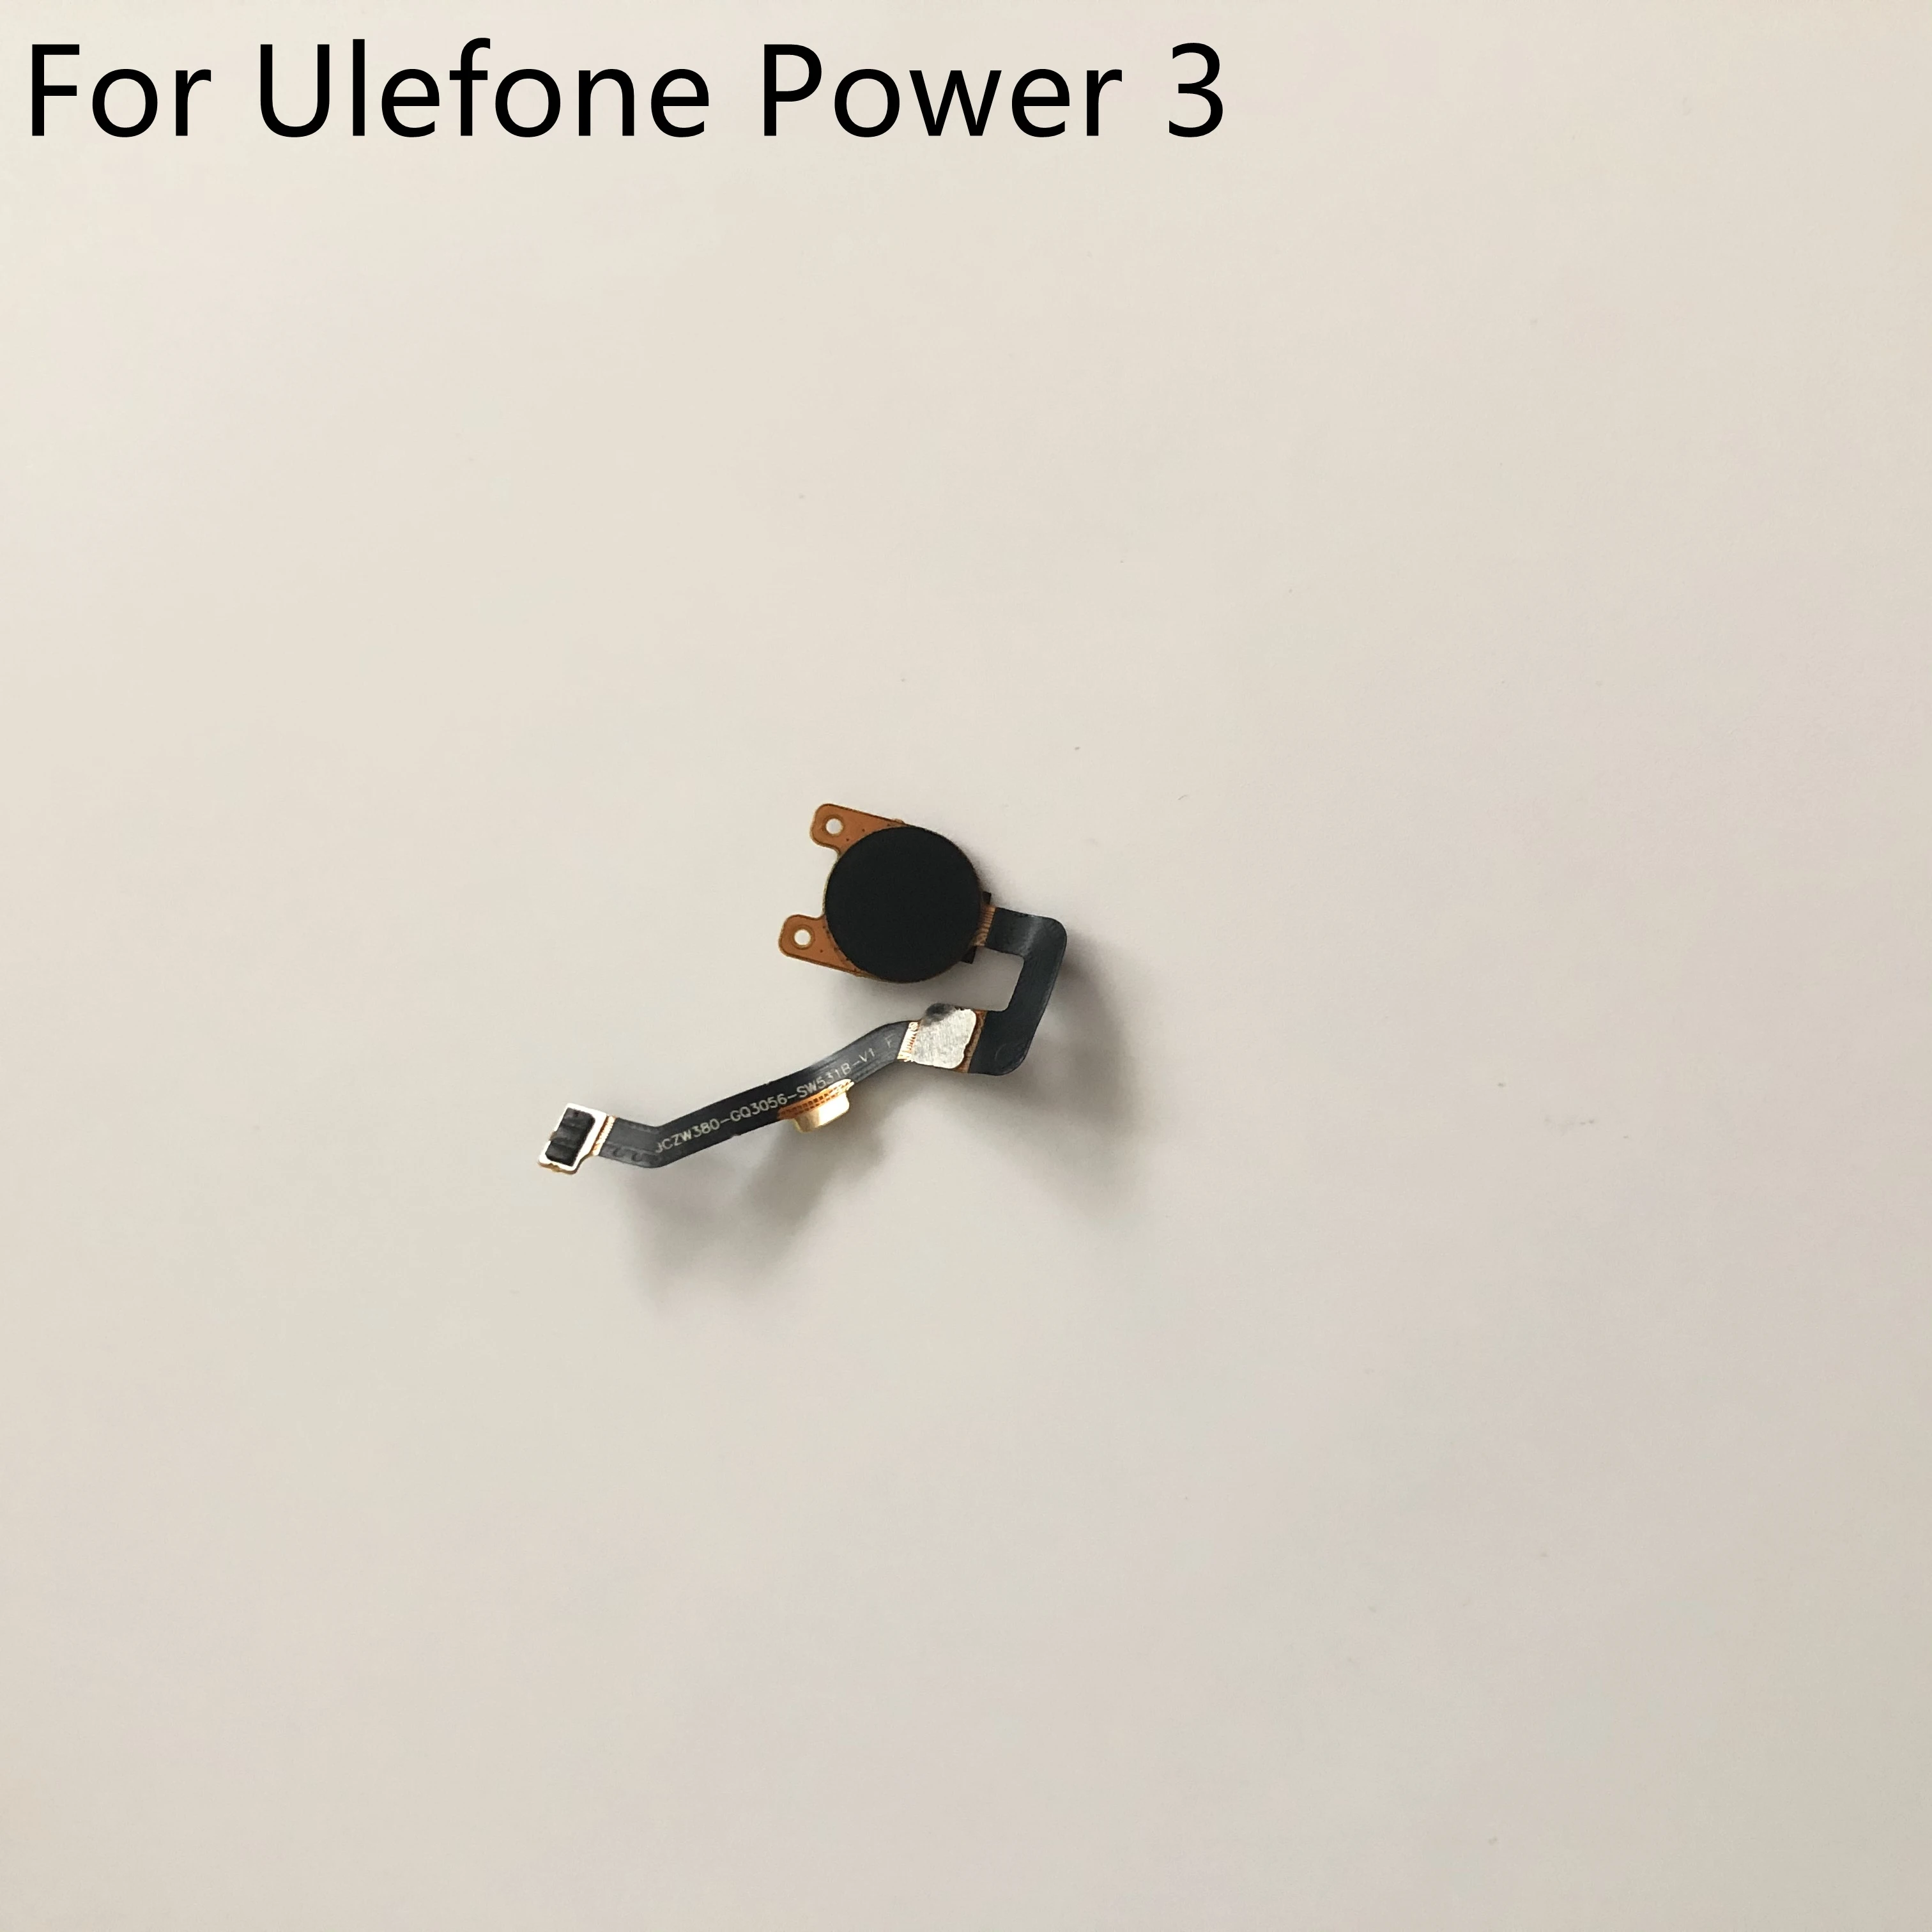 

Ulefone Power 3 HOME Main Button With Flex Cable FPC For Ulefone Power 3 MT6763 Octa Core 2160X1080 Smartphone